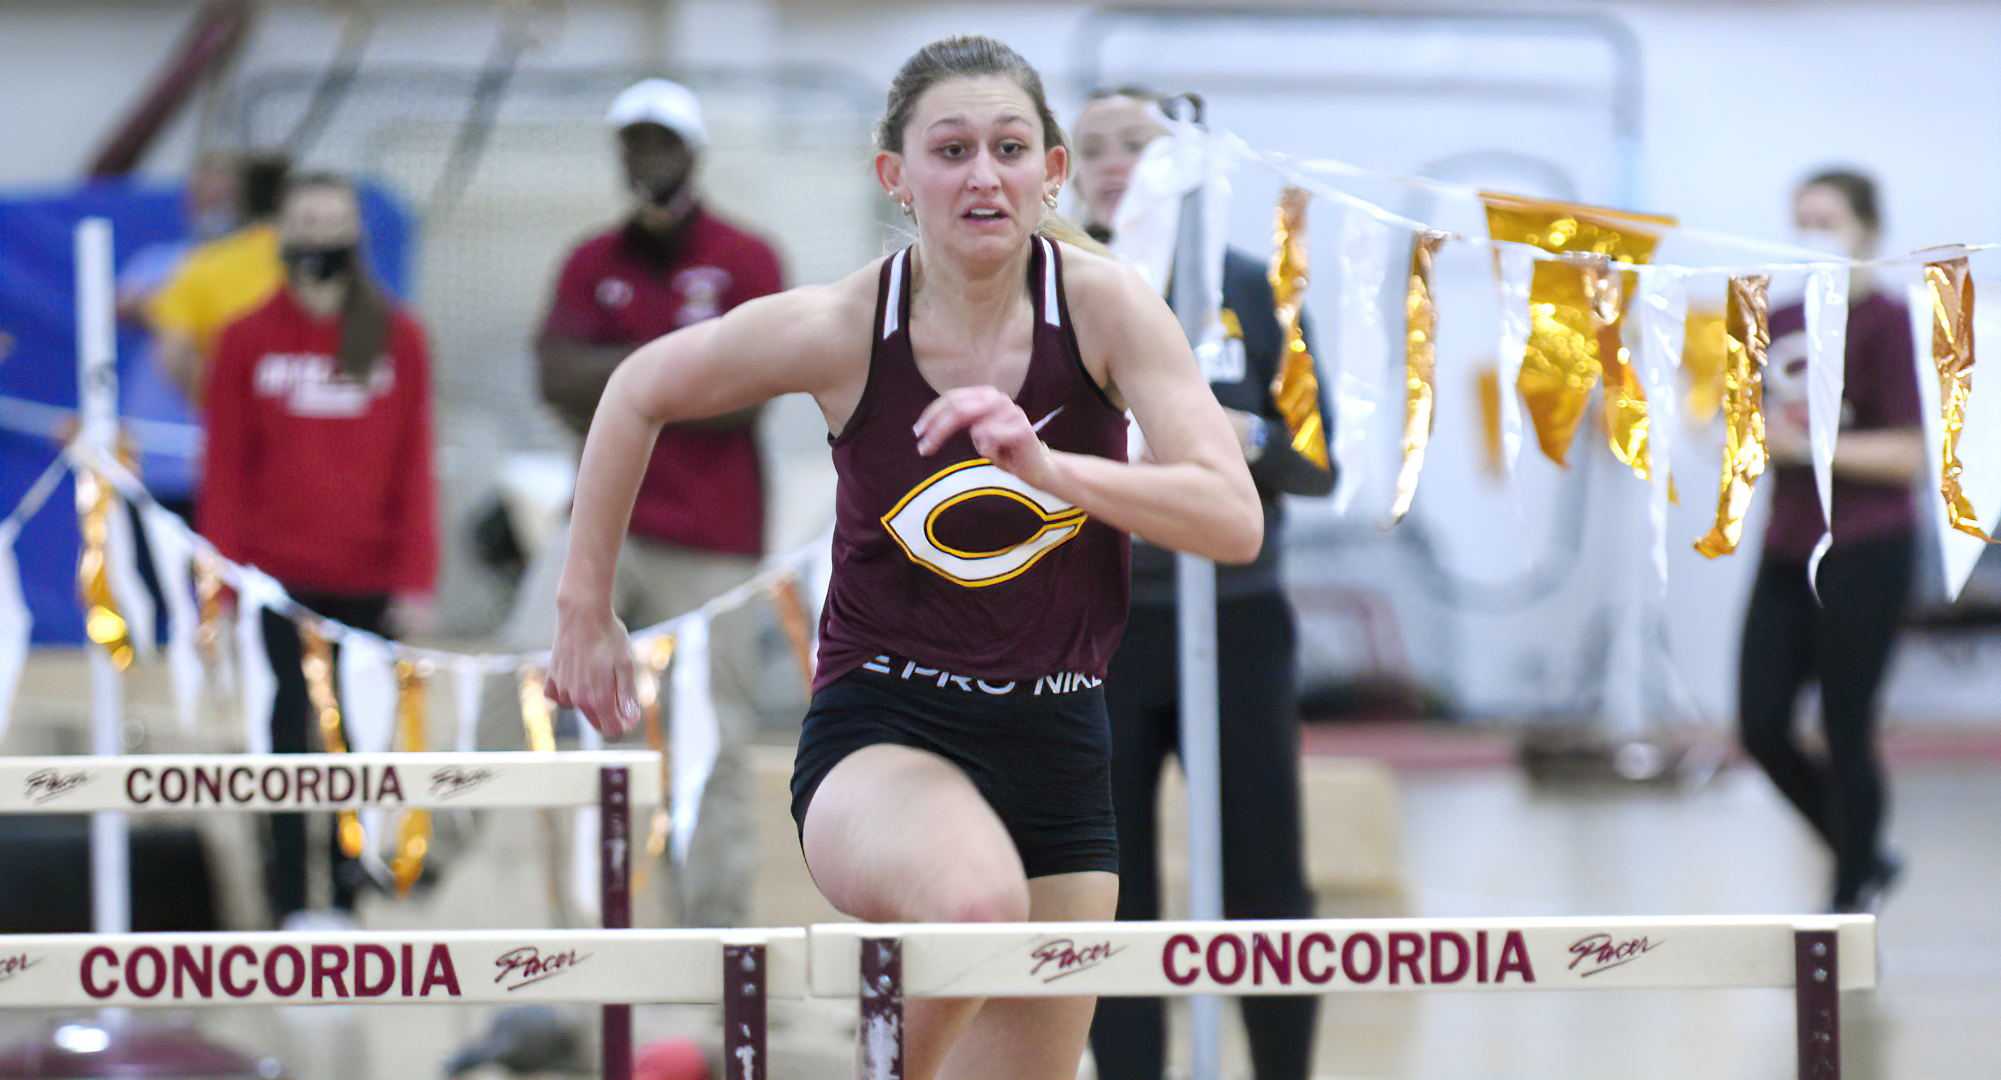 Sophomore Peyton Selle rallied to win the pentathlon at the MIAC Indoor Championship Meet. She finished in the Top 3 in four of the five events.